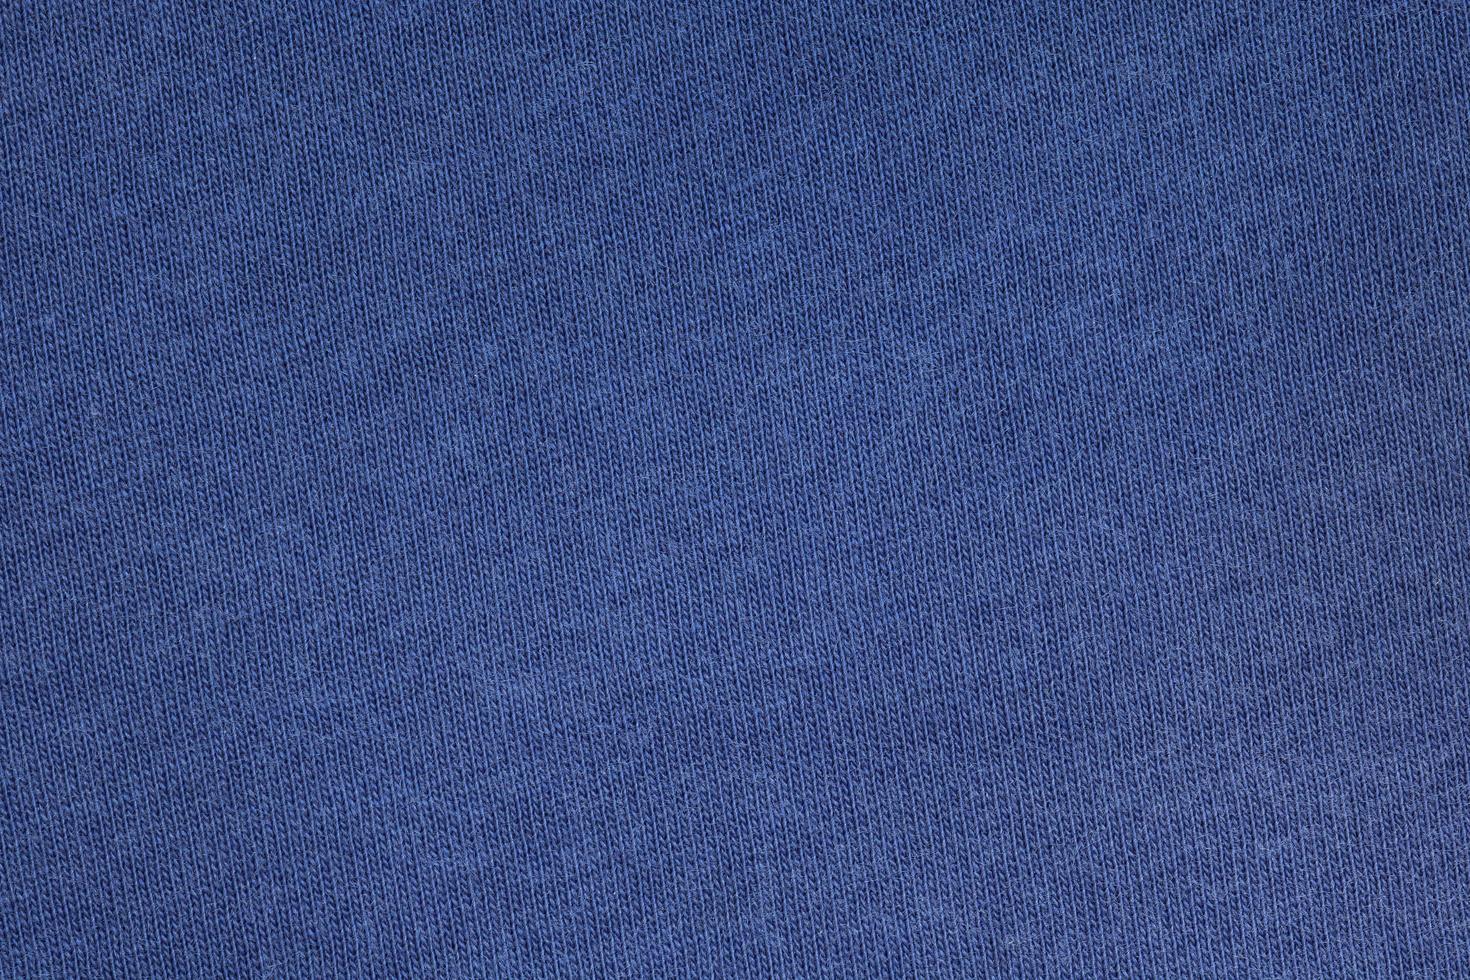 Top view blue fabric texture photo